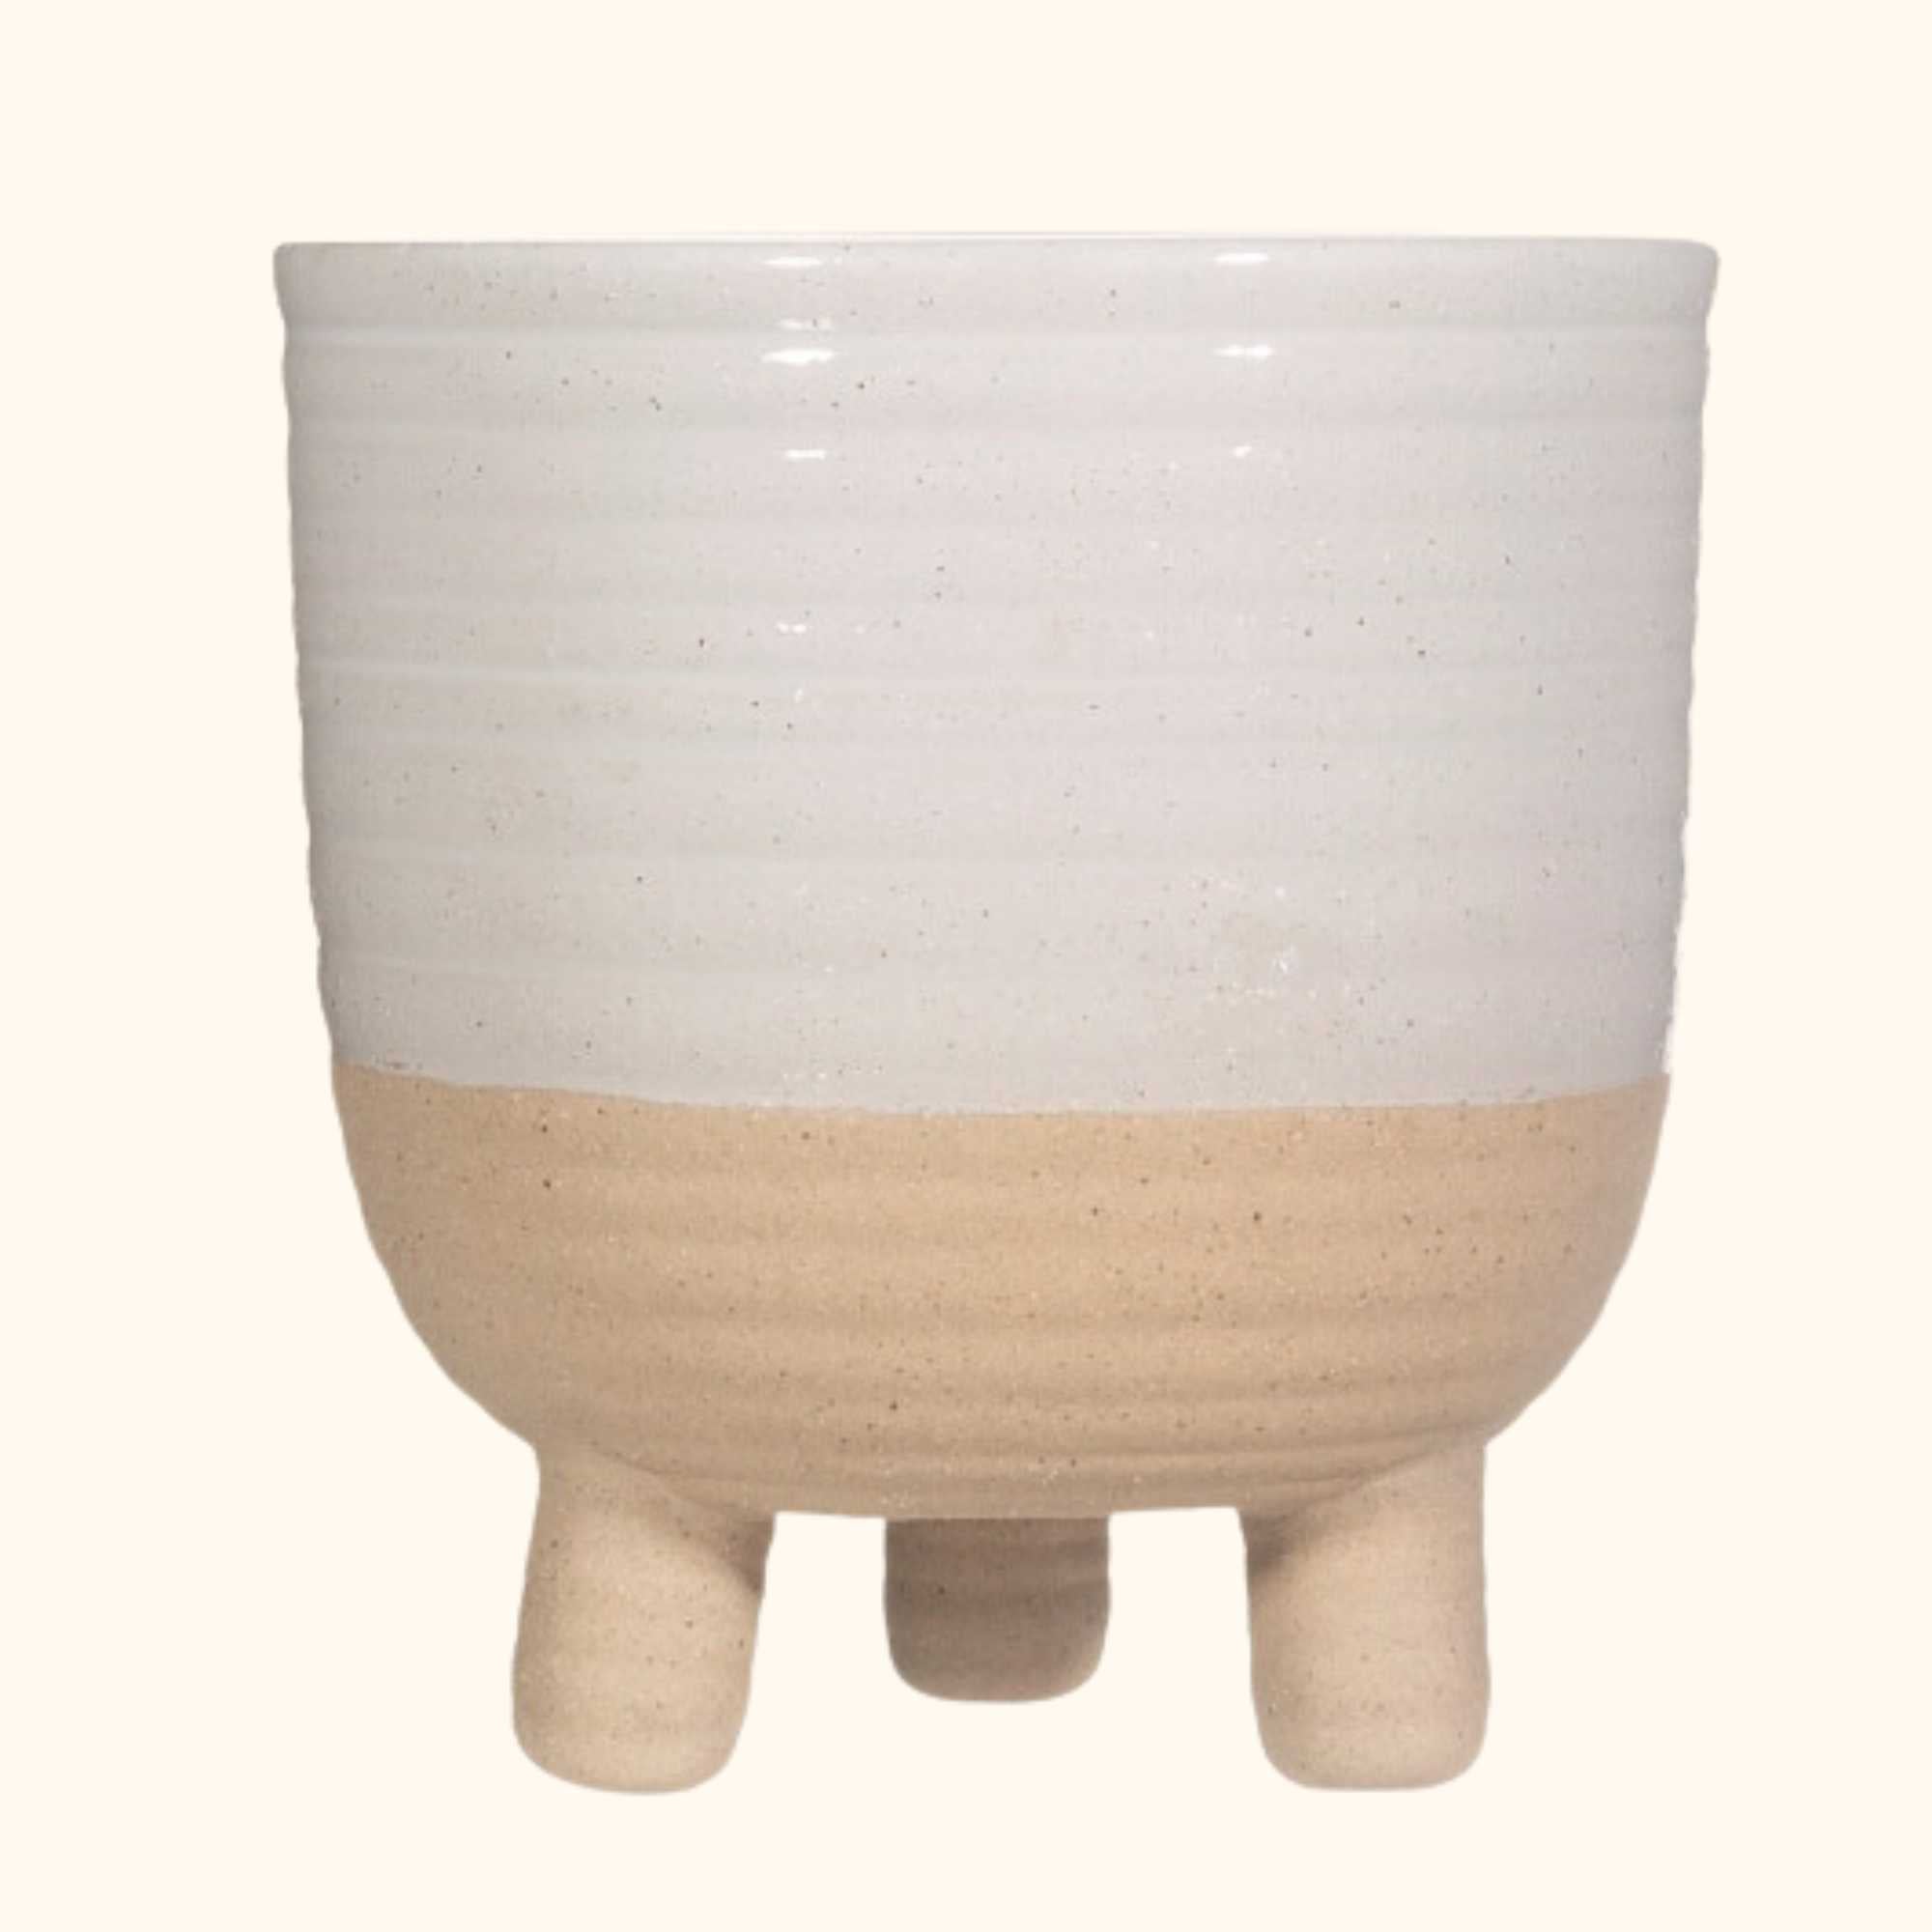 Sass and Belle Rustic White Half Glazed Large Plant Pot - Sass and belle - Plant pots